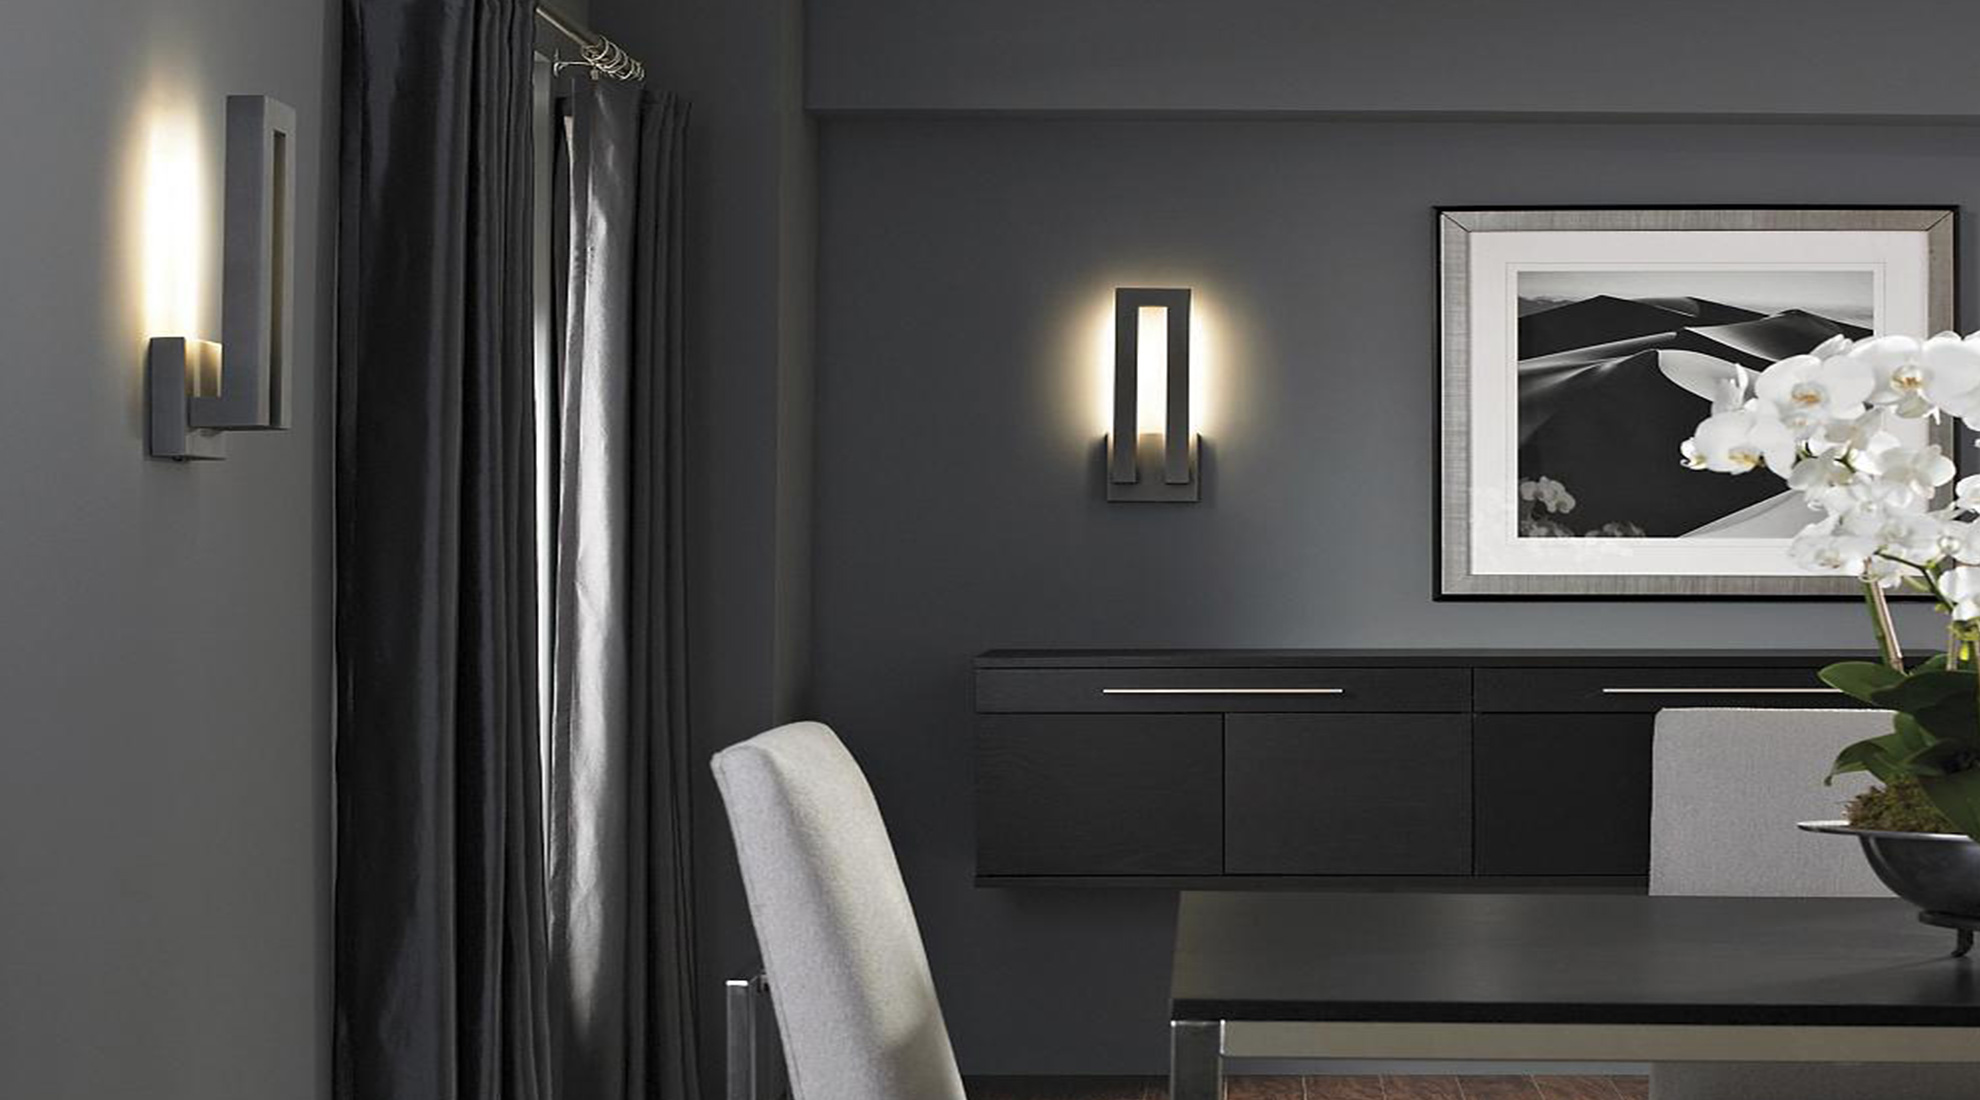 How To Choose Wall Lights | Wall Lighting Buyer's Guide at Lumens.com